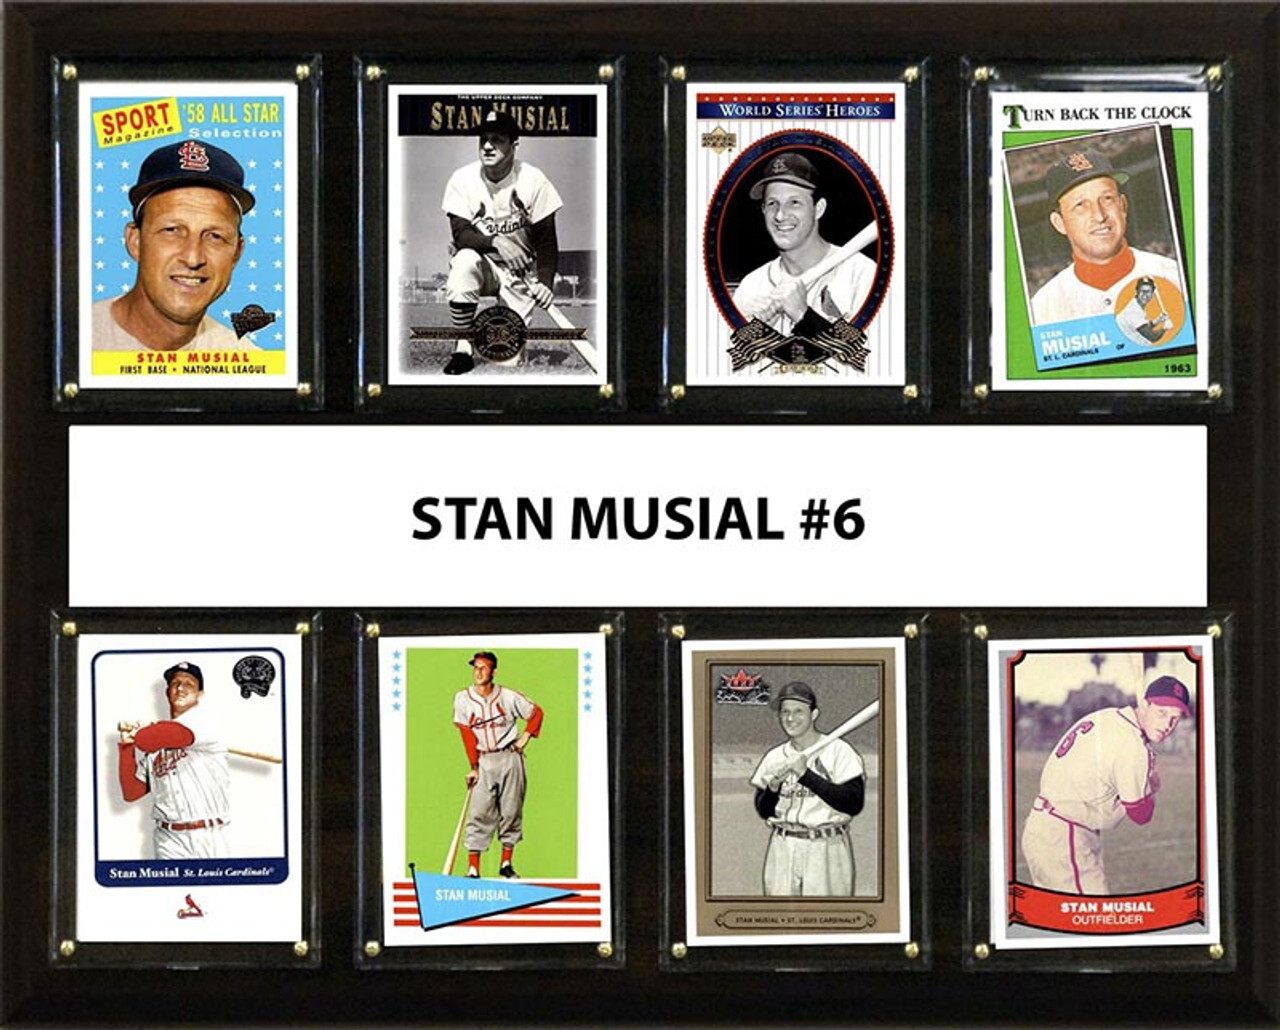 Stan Musial - St. Louis Cardinals OF